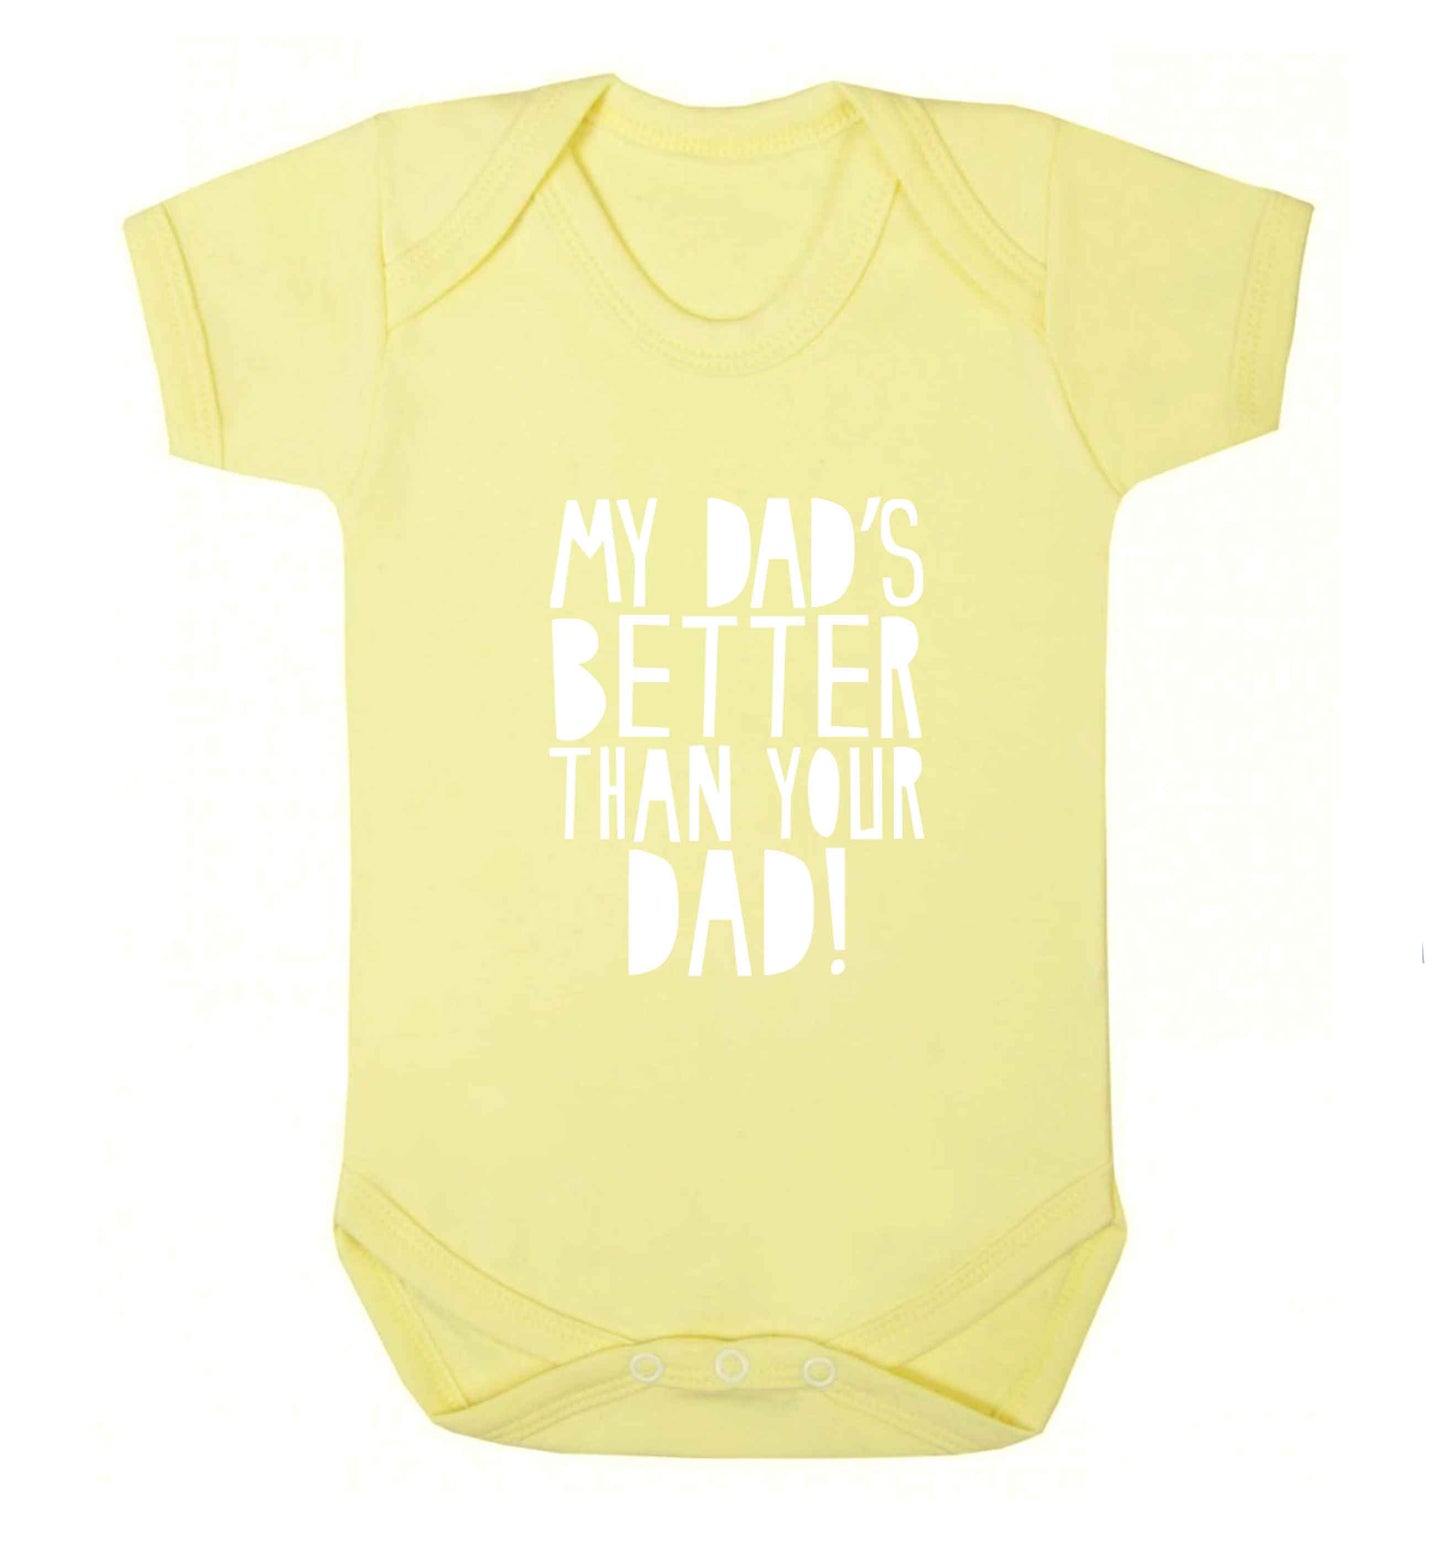 My dad's better than your dad! baby vest pale yellow 18-24 months